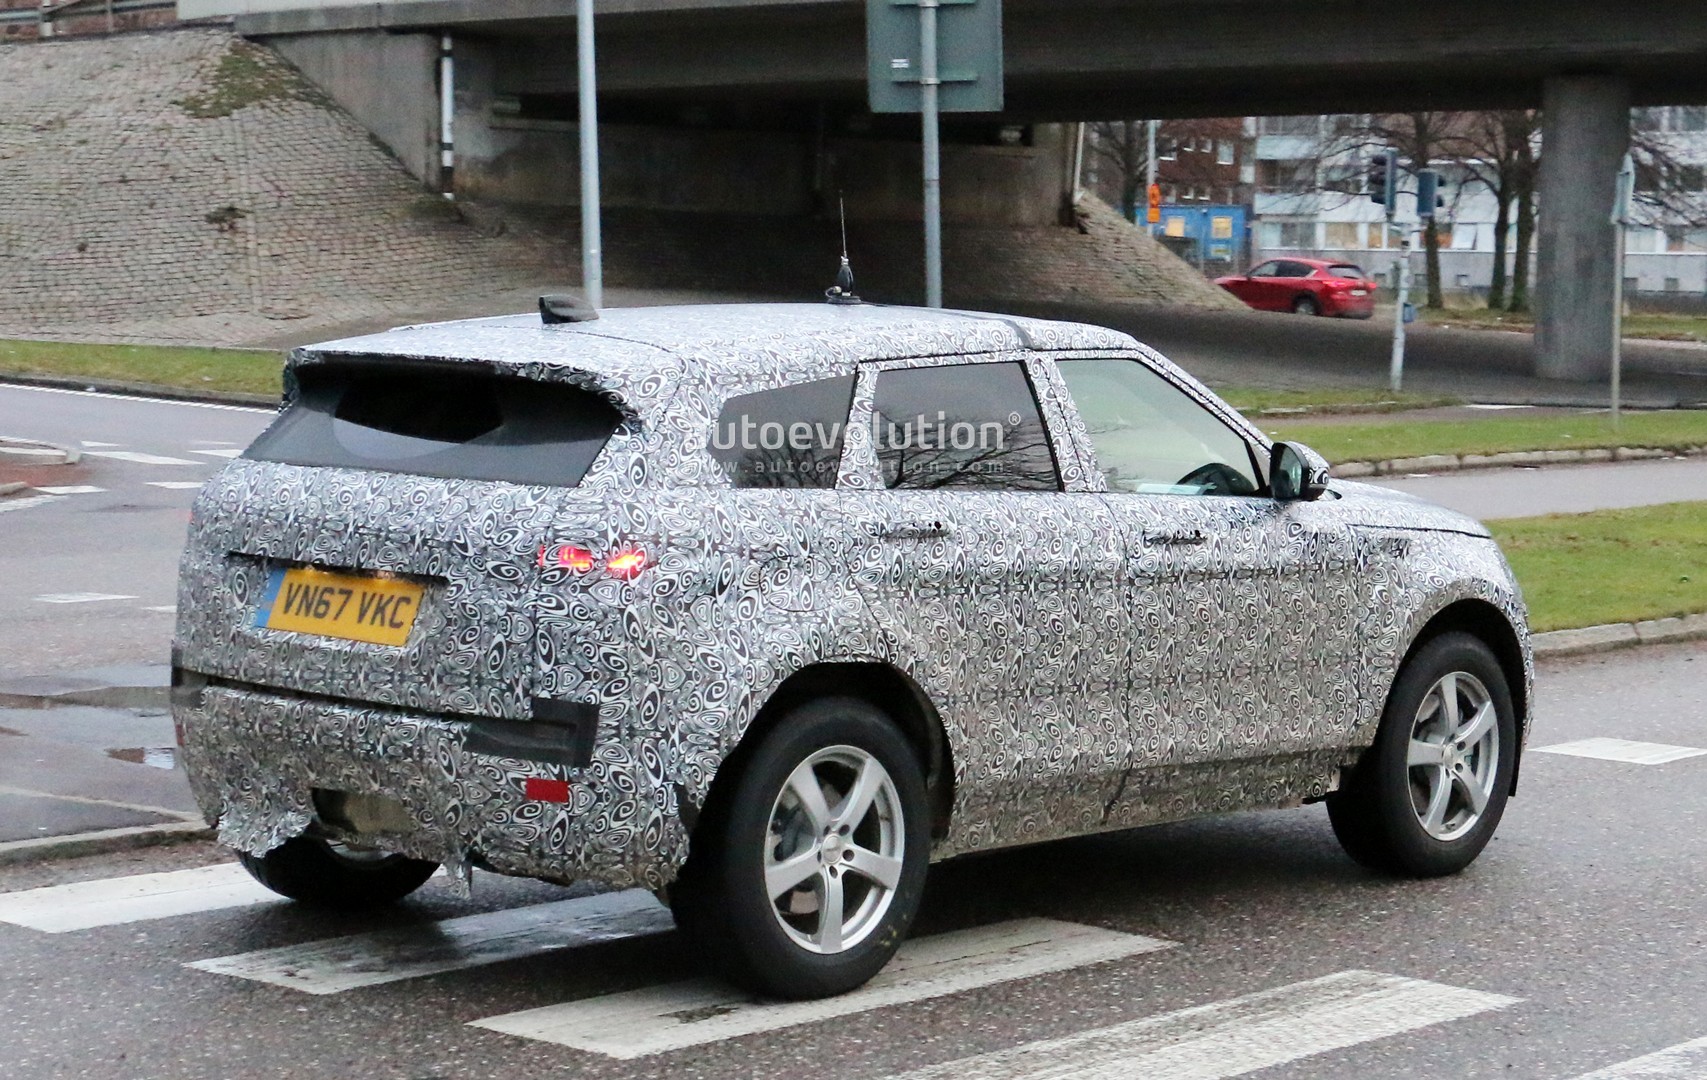 2018 - [Land Rover] Range Rover Evoque II - Page 2 2019-range-rover-evoque-has-scraped-its-camo-most-likely-due-to-off-roading_9